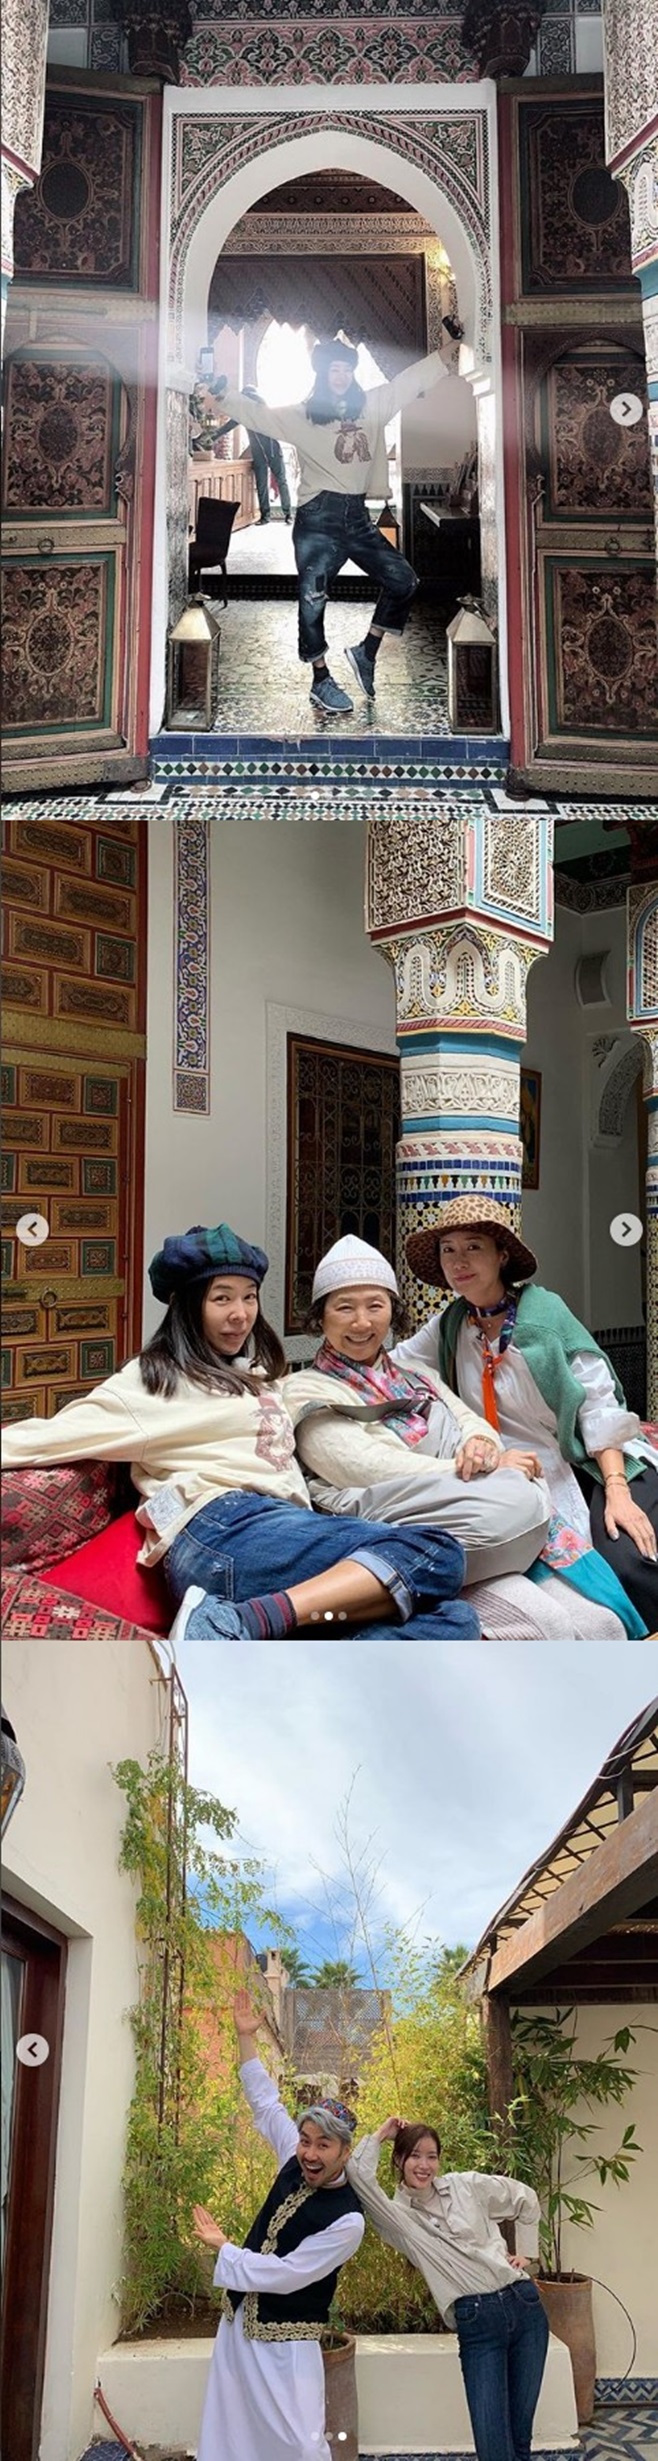 Actor Lee Hye-Yeong floats in Morocco with Go Doo-shim Oh Yeon-soooo Im Soo-hyangLee Hye-Yeong hashtaged Lee Hye-Yeong, inspiration Chul, Morocco (morocco), and Unity to Rise on his SNS on the 12th.In the photo released, Lee Hye-Yeong, who left for Morocco through JTBC entertainment program Unified Night 2 (hereinafter referred to as Unified 2), was enjoying the trip in a free posture.In the ensuing photo, Go Doo-shim Oh Yeon-soooo, who is traveling with Lee Hye-Yeong, is laughing at the camera.In another photo, Noh Hong-chul and Im Soo-hyang, fixed members of I have to get together 2, pose playfully.Union 2, which will be broadcast in January, will be featured as an Actor special feature.Earlier, Go Doo-shim Oh Yeon-sooo Lee Hye-Yeong Im Soo-hyang four people left for Morocco, a desert country, on the 10th with guide Noh Hong-chul.